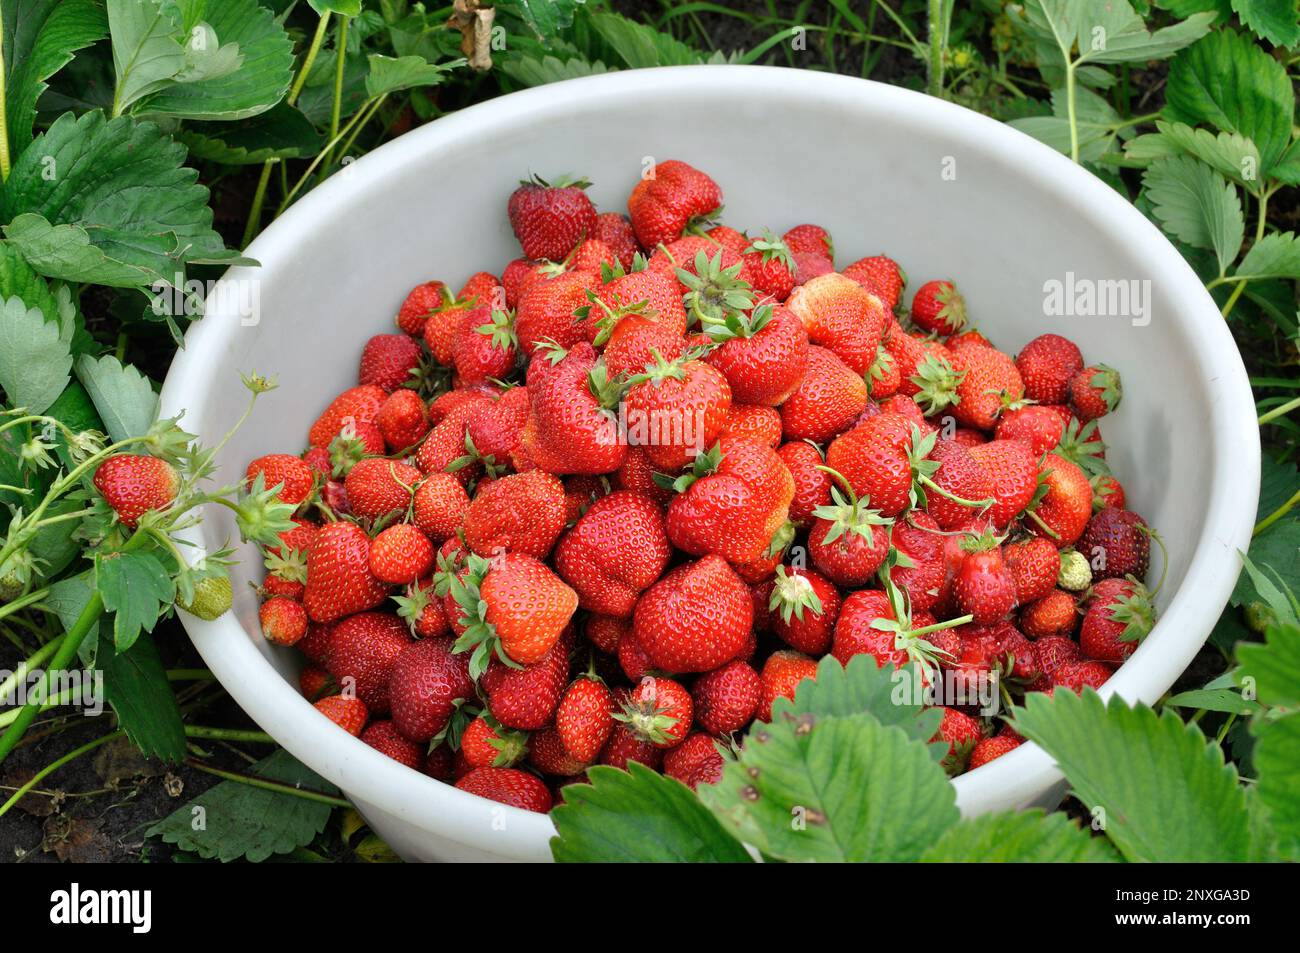 close-up of fresh ripe strawberries after harvesting Stock Photo